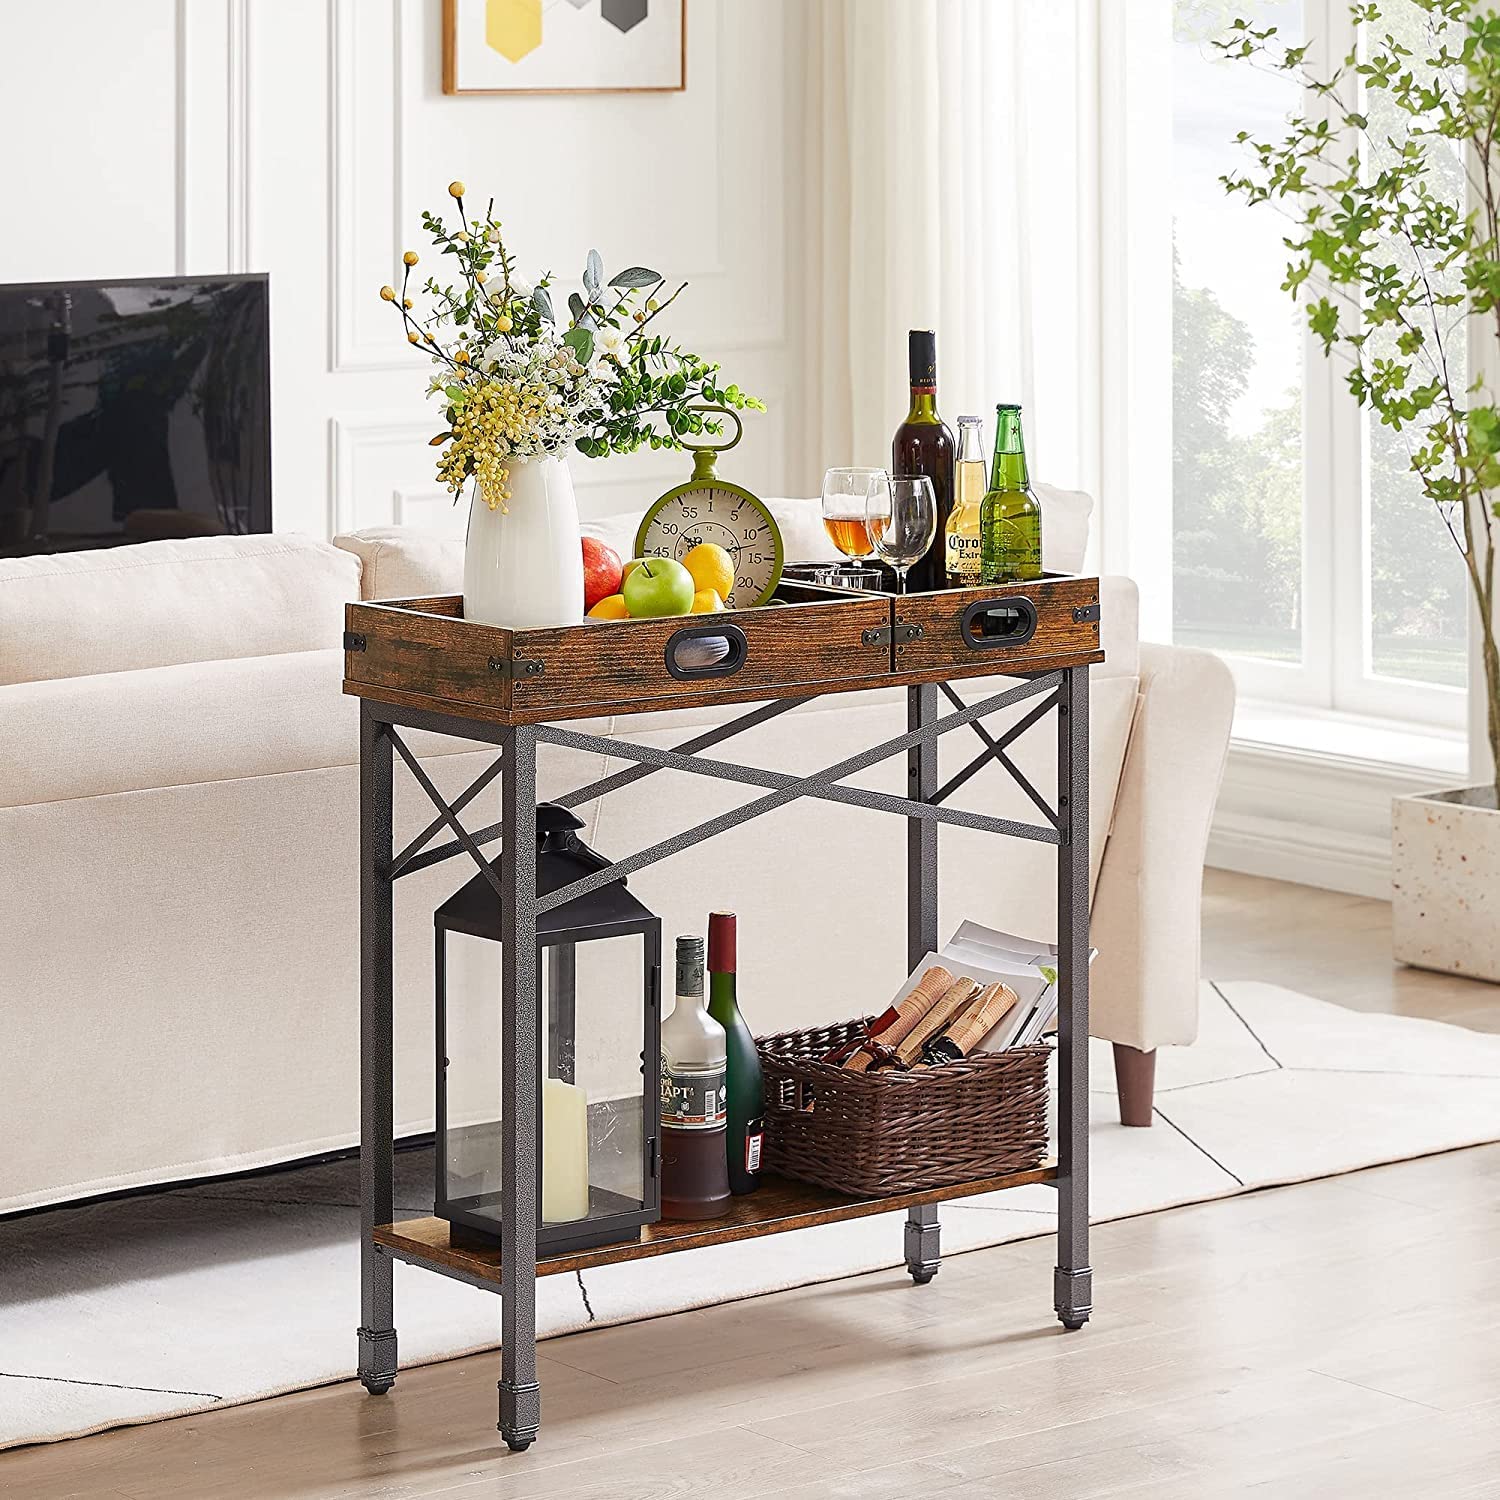 Narrow Serving Table with Storage Shelf